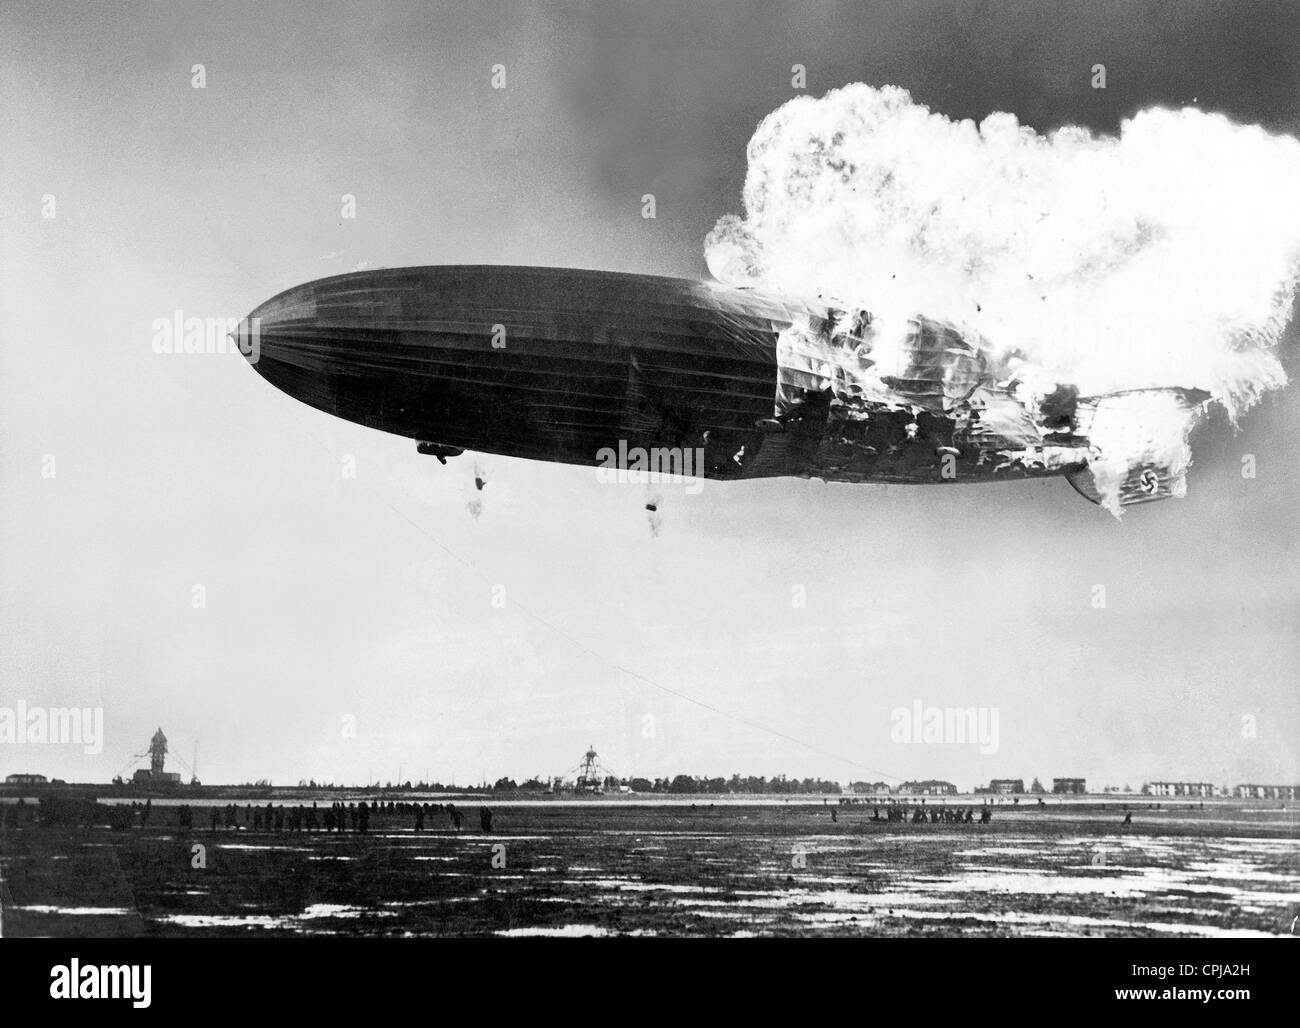 Image result for The Hindenburg took fire 200 feet above the ground as it approached the mooring post at the Naval Air Station in Lakehurst, New Jersey, in the evening of 6 May 1937